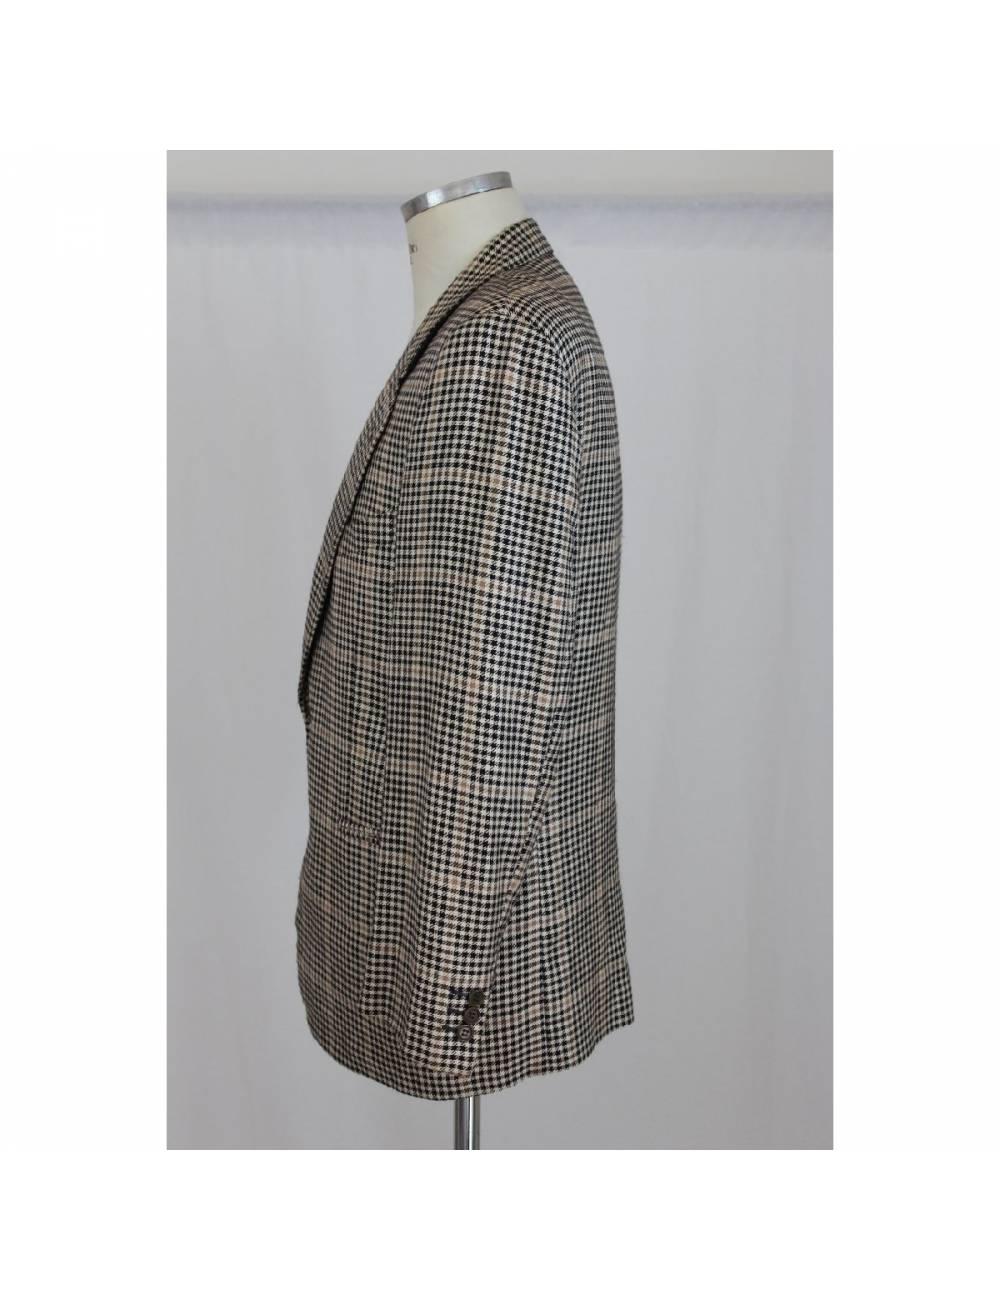 Gianfranco Ferrè vintage jacket 1990s, black and beige checked, two pockets on the sides and a chest pocket, 50% wool 50% silk. Excellent vintage condition.

Size: 50 It 40 Us 40 Uk

Shoulder: 50 cm
Bust / Chest: 53 cm
Sleeve: 62 cm
Length: 82 cm